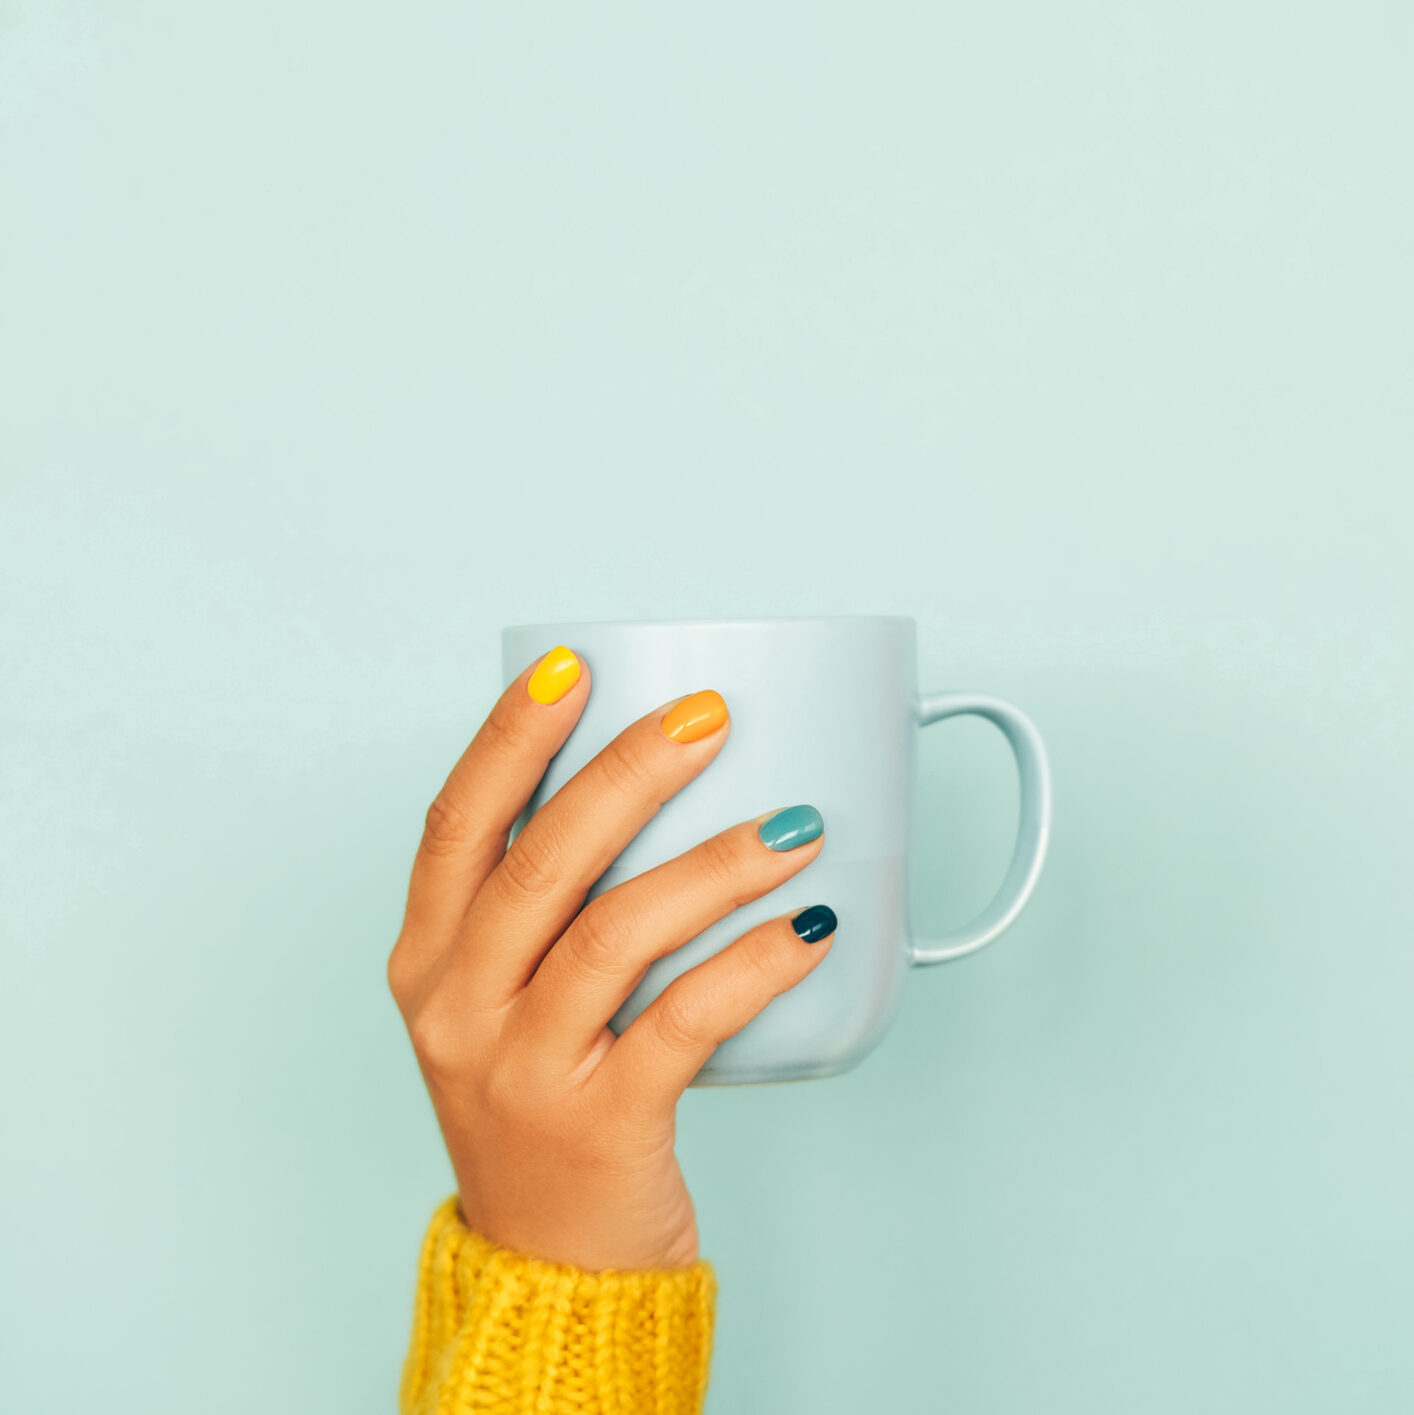 Woman hand with bright manicure and in illuminating yellow knitted sweater is holding light blue cup against light blue background. Trendy colors of the year 2021. Front view. Copy space for your design